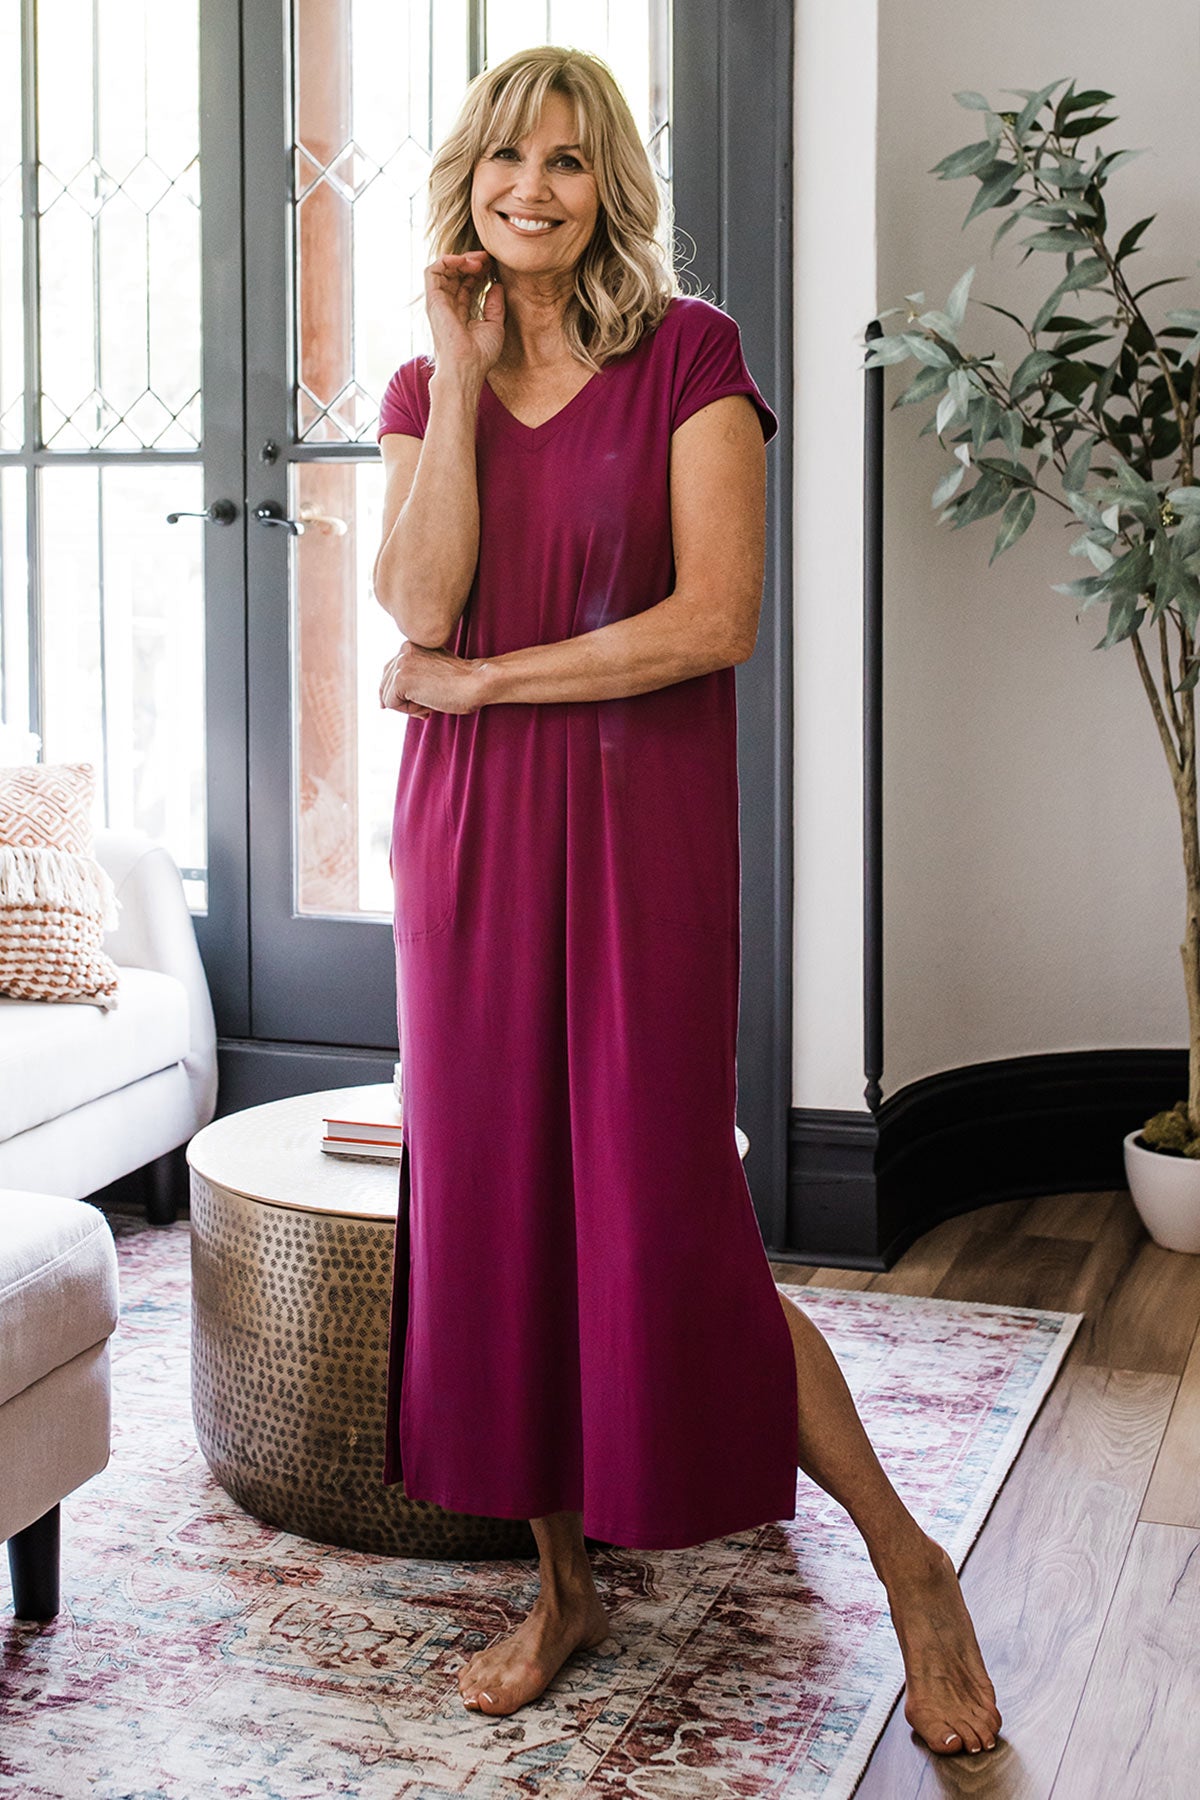 A woman standing and smiling with one foot stretched out to the side, wearing Yala Sloane V-Neck Cap Sleeve Bamboo Maxi Dress in Boysenberry